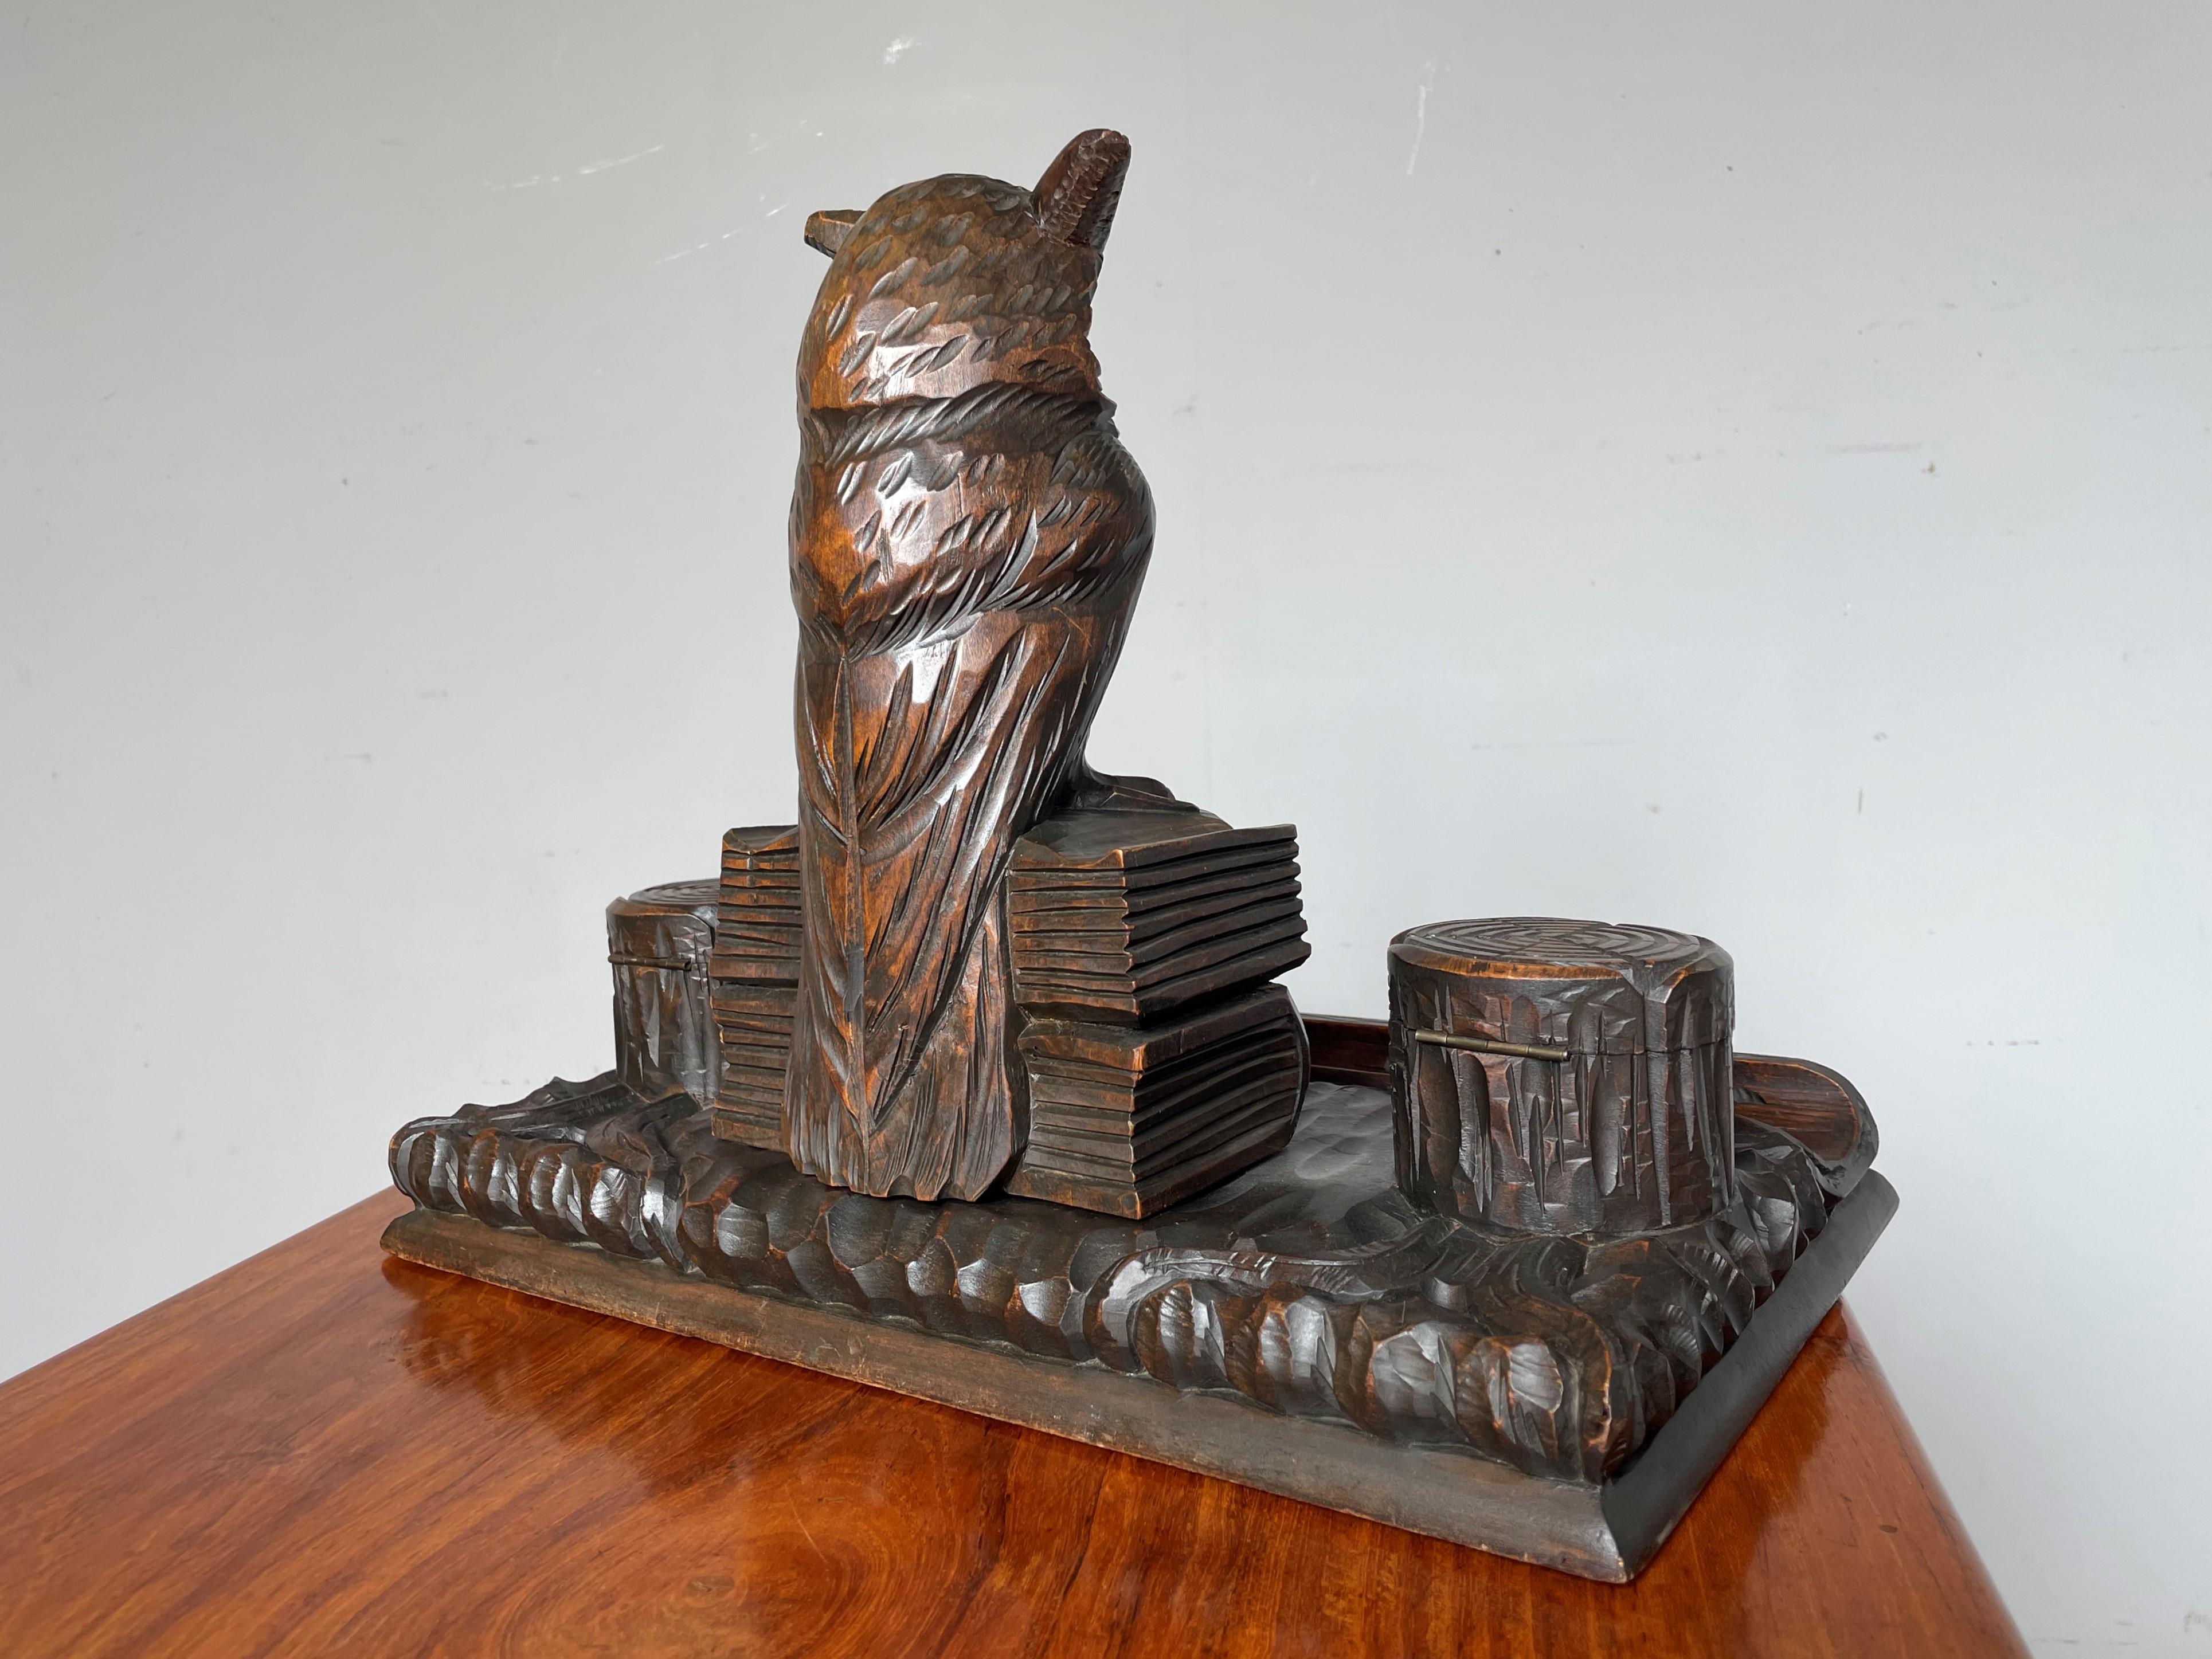 Glass Antique Hand Carved Black Forest Inkstand with Owl on Books Sculpture & Inkwells